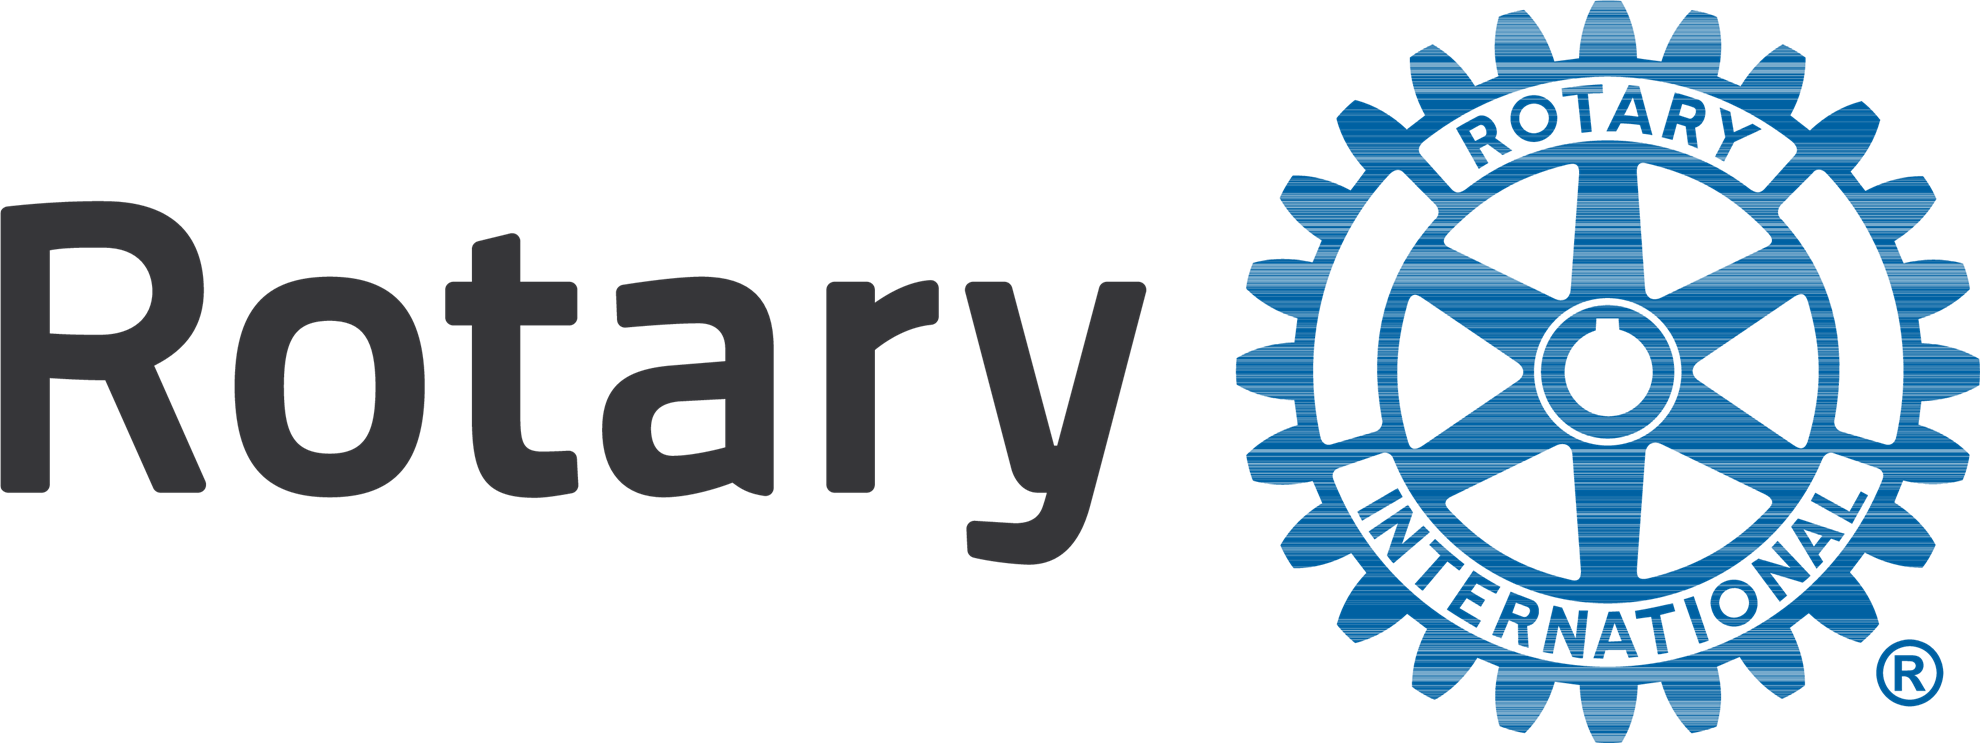 Rotary logo and slogan transparent PNG - StickPNG